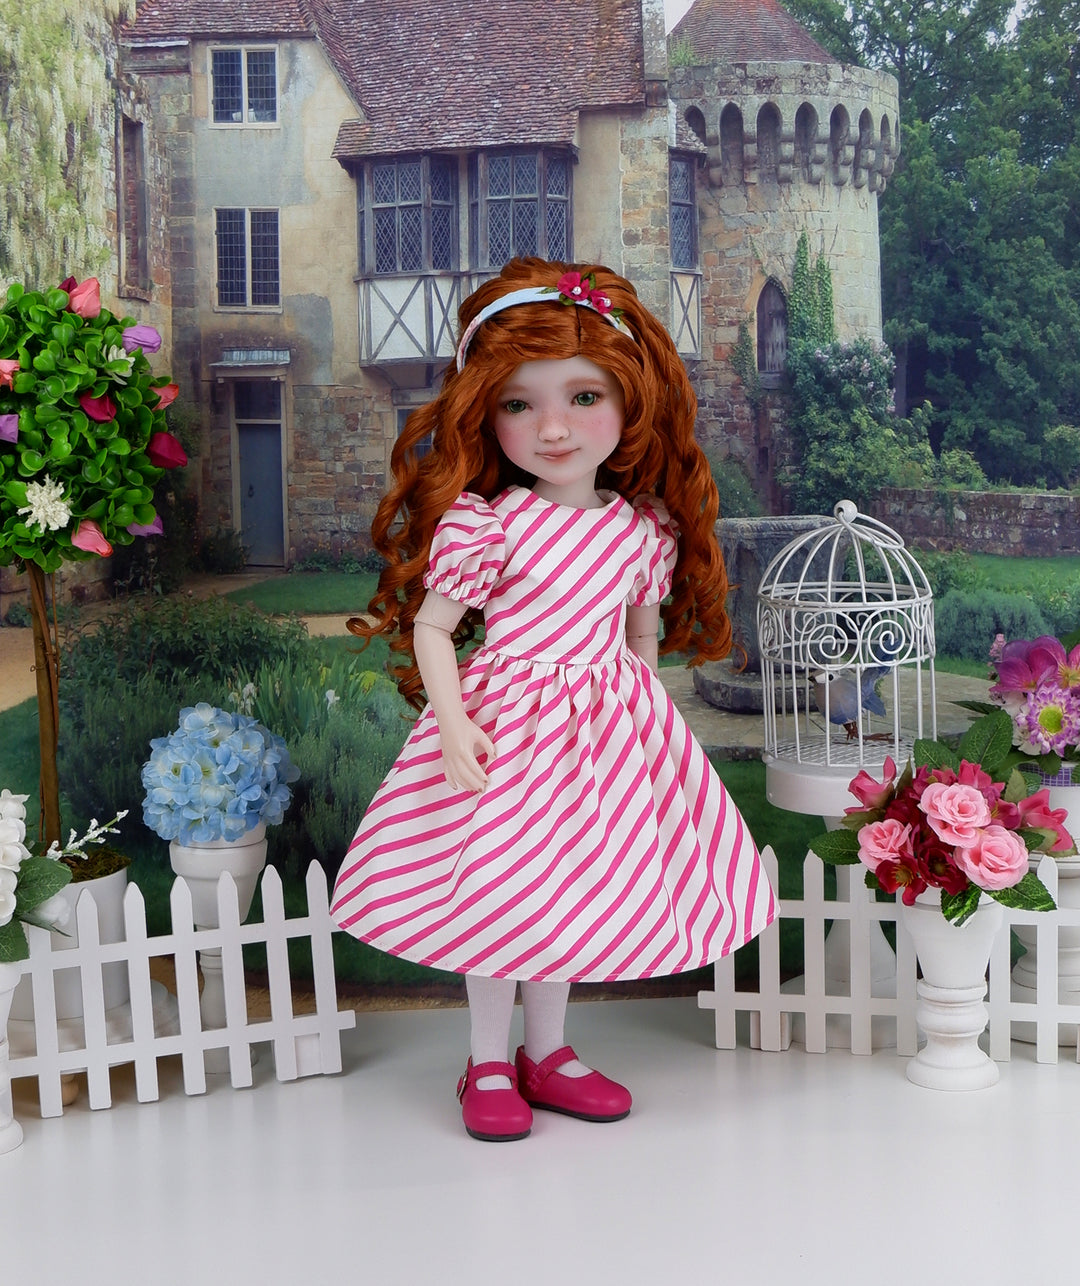 Beautiful Rose - dress & pinafore with shoes for Ruby Red Fashion Friends doll